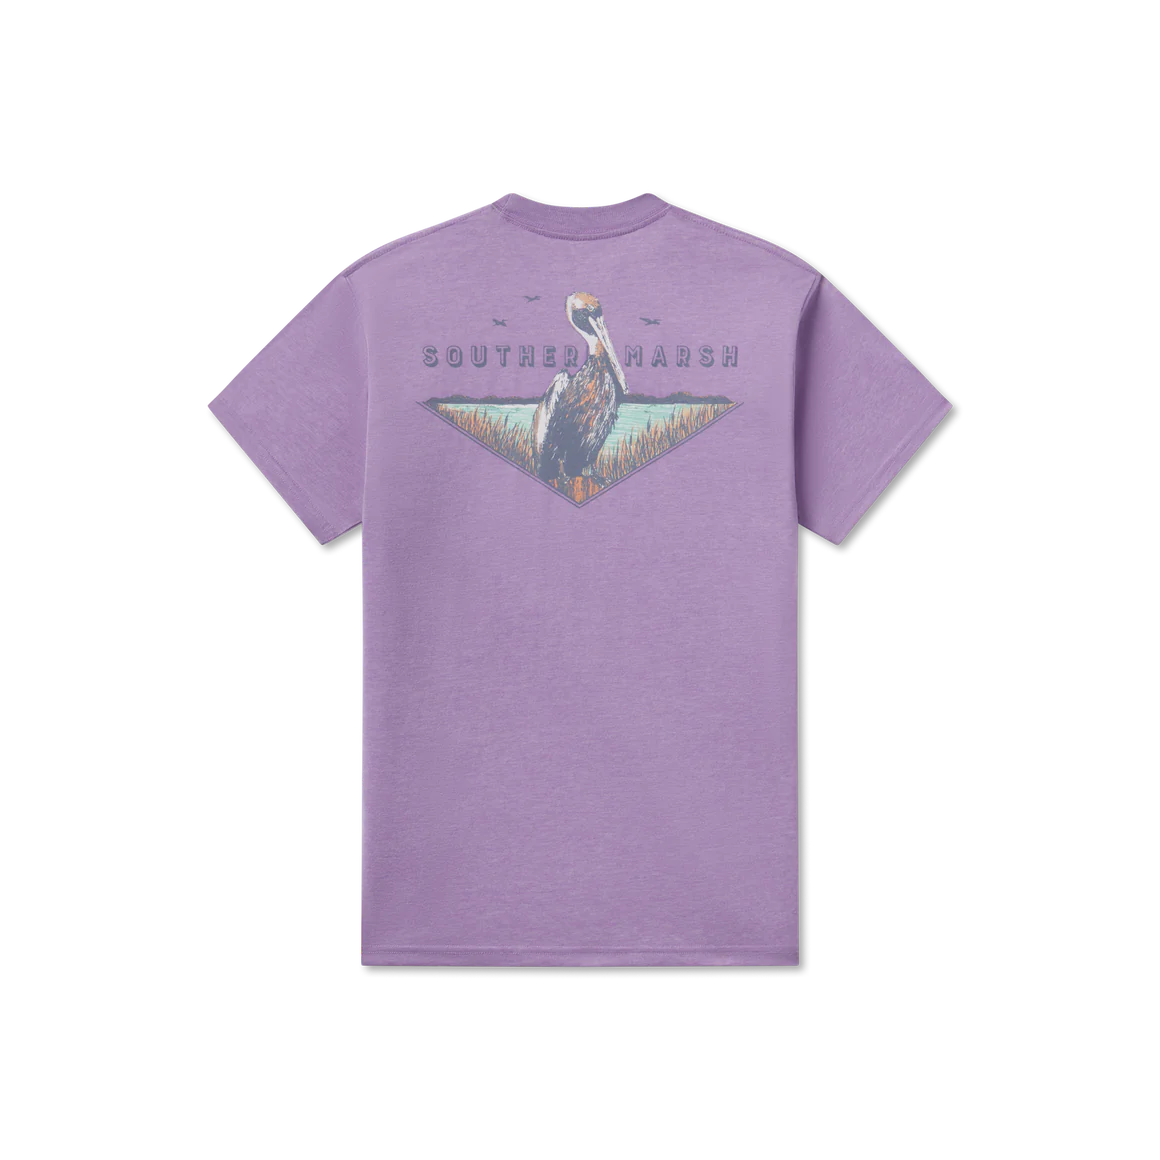 SEAWASH TEE - POSTED PELICAN - WASHED BERRY